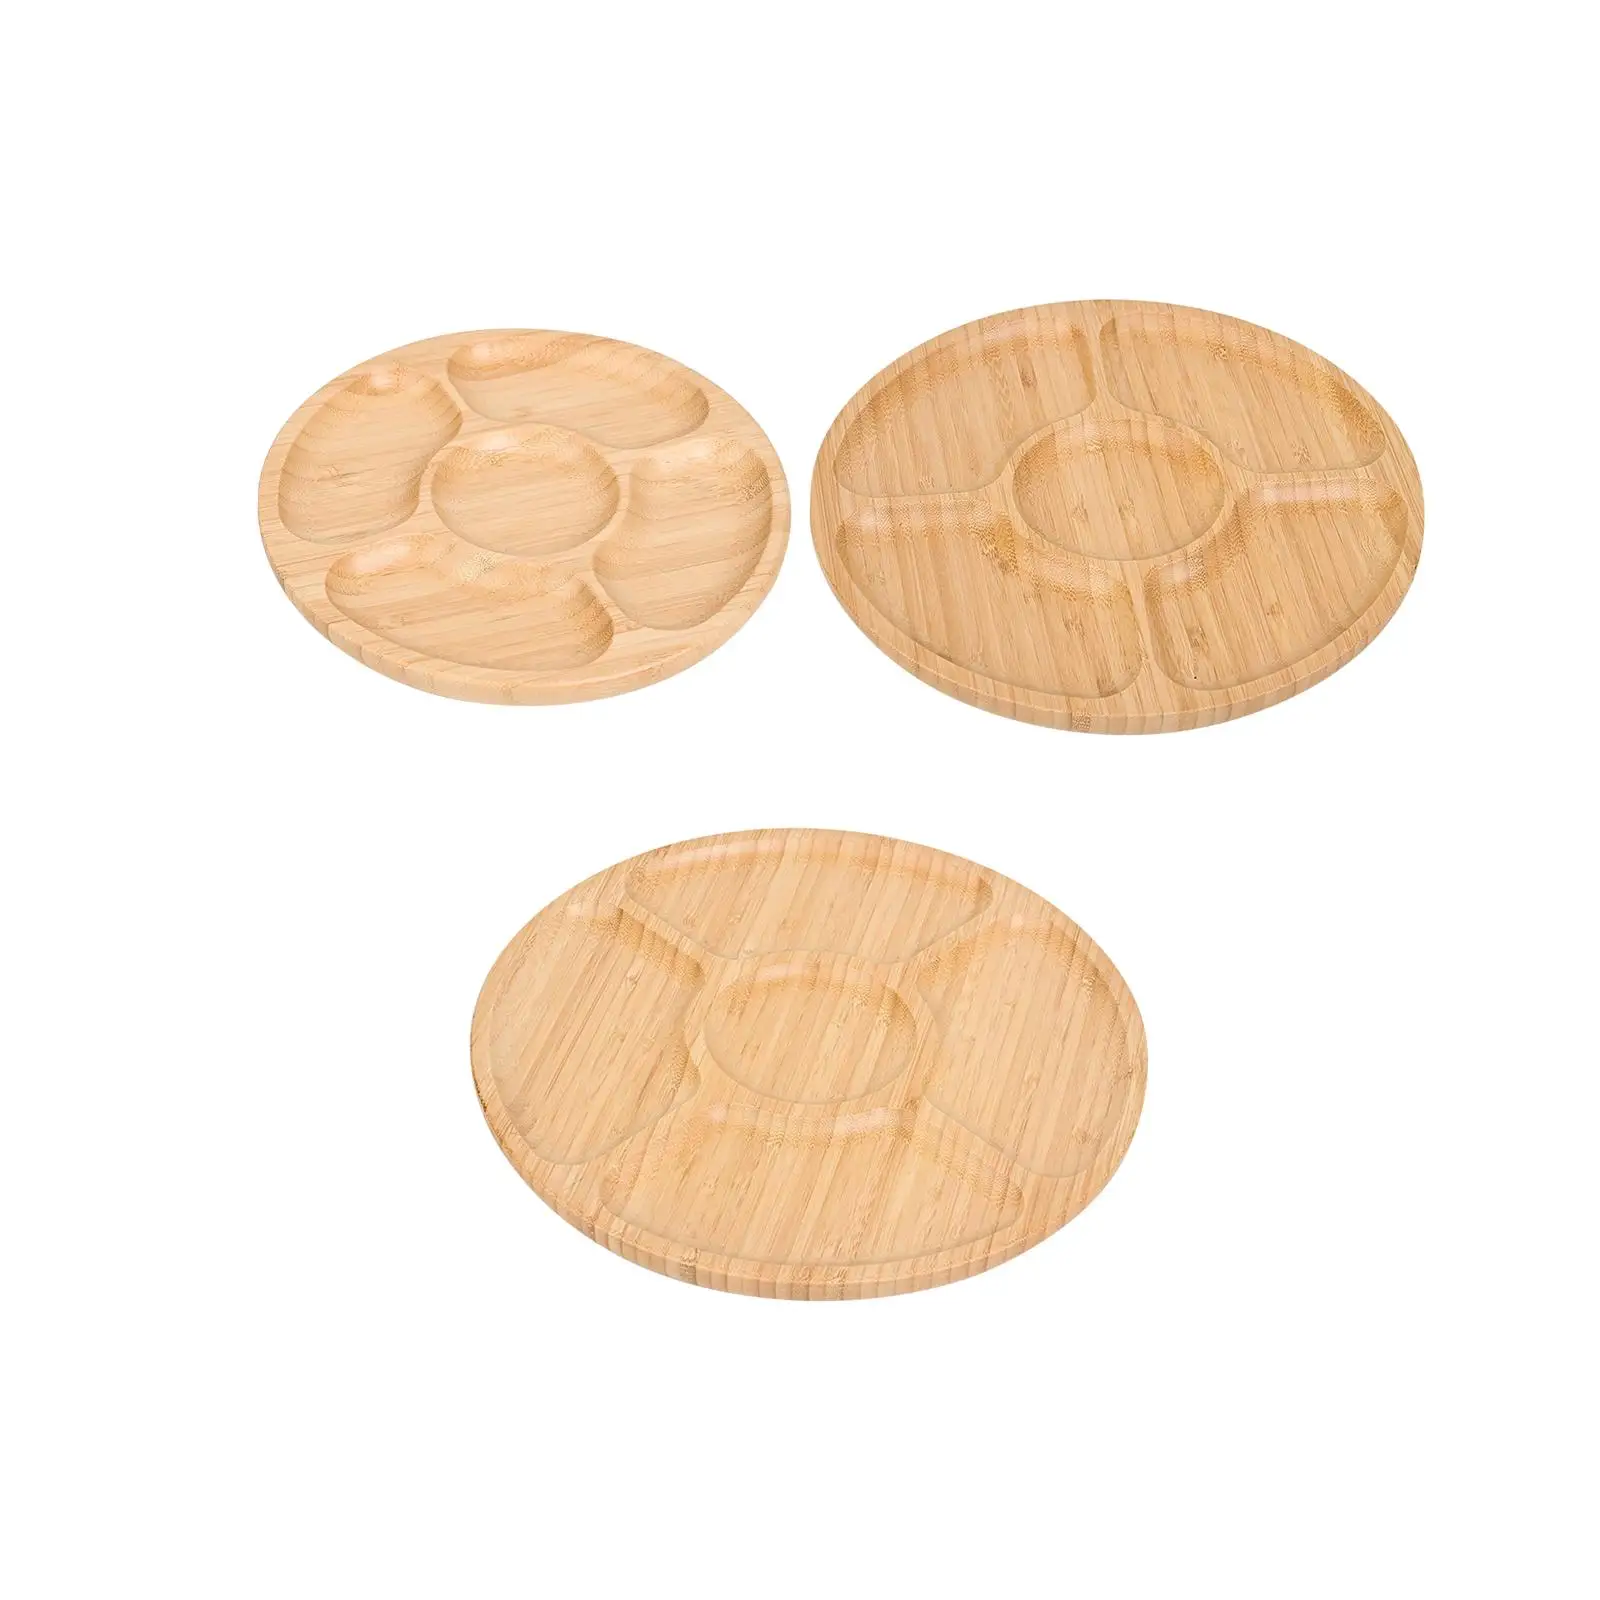 Wooden Tray Wooden Serving Tray 5 Section Wooden Tea Trays Decor Display Round Wood Tray for Candies Dinner Party Vegetable